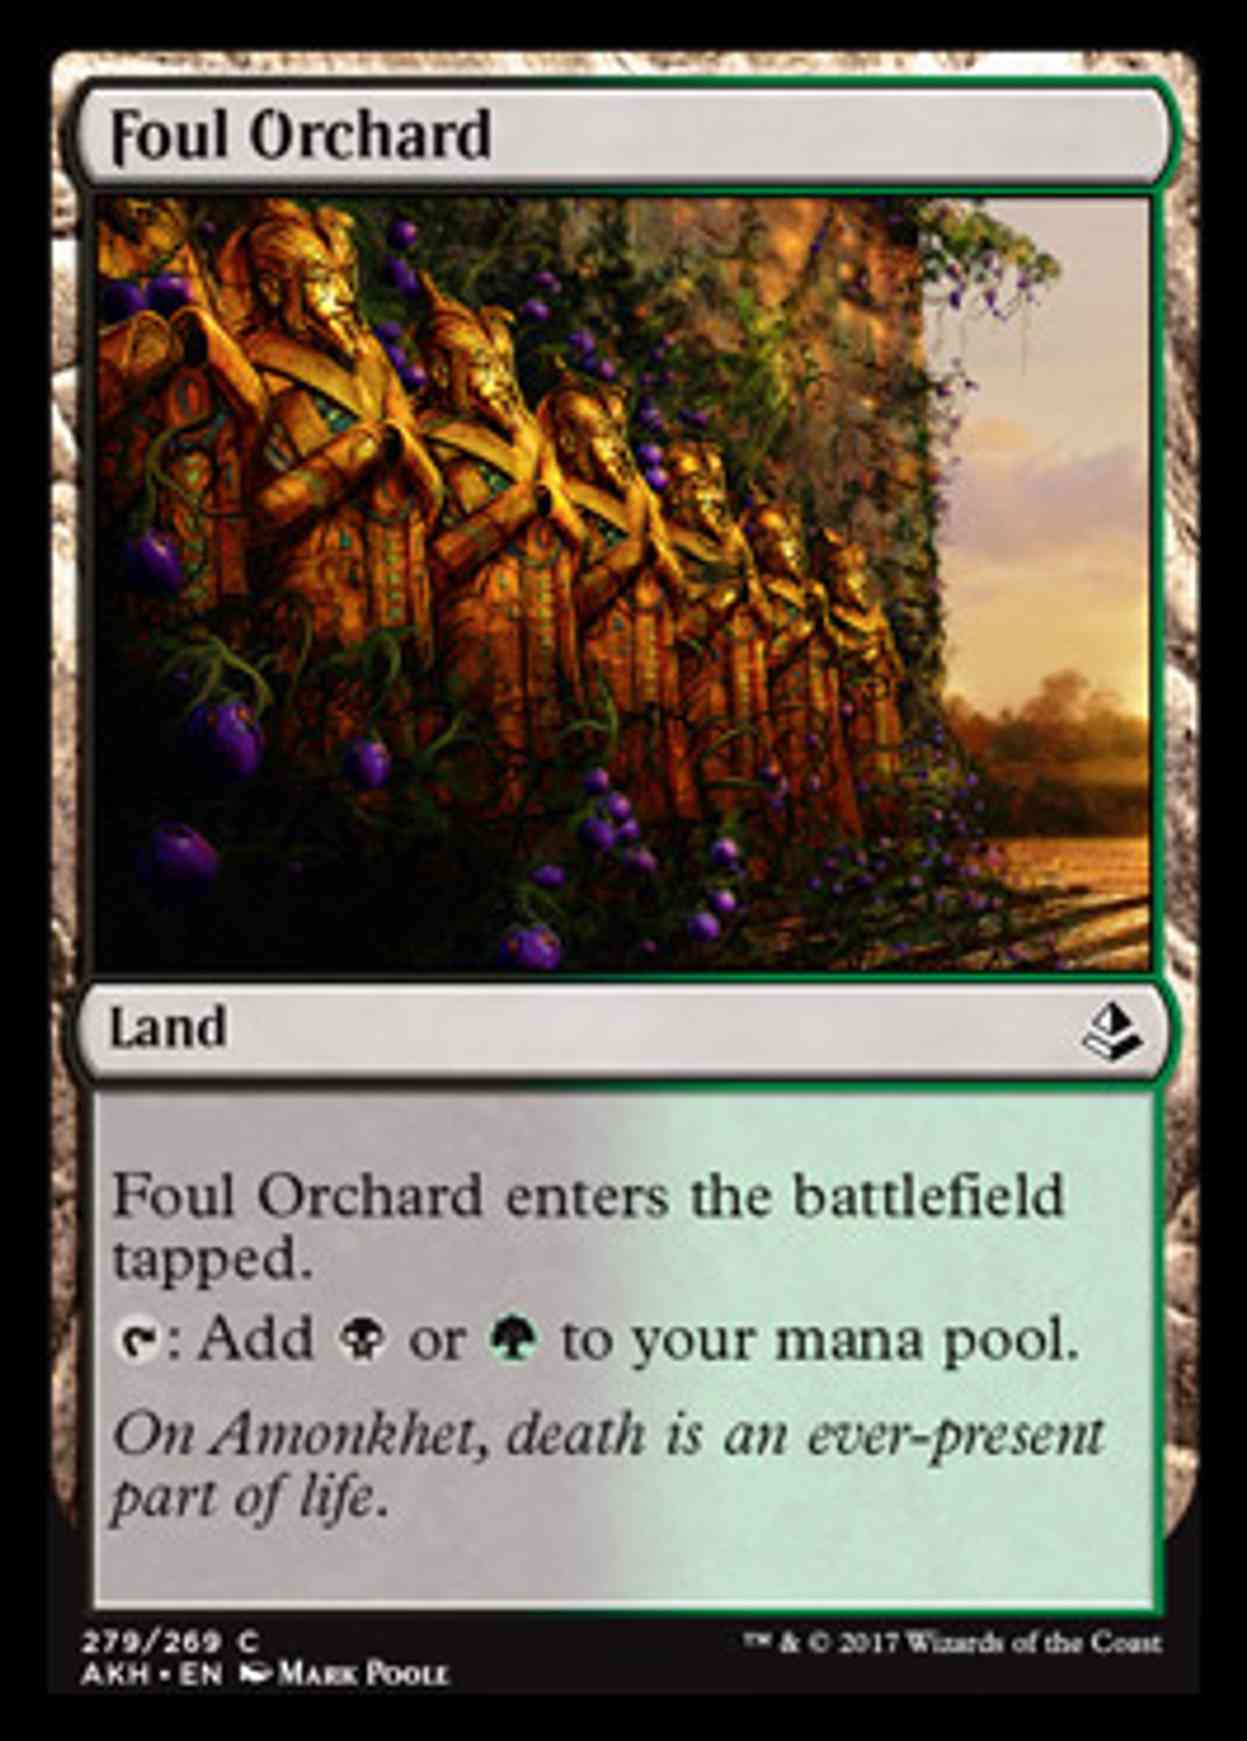 Foul Orchard magic card front